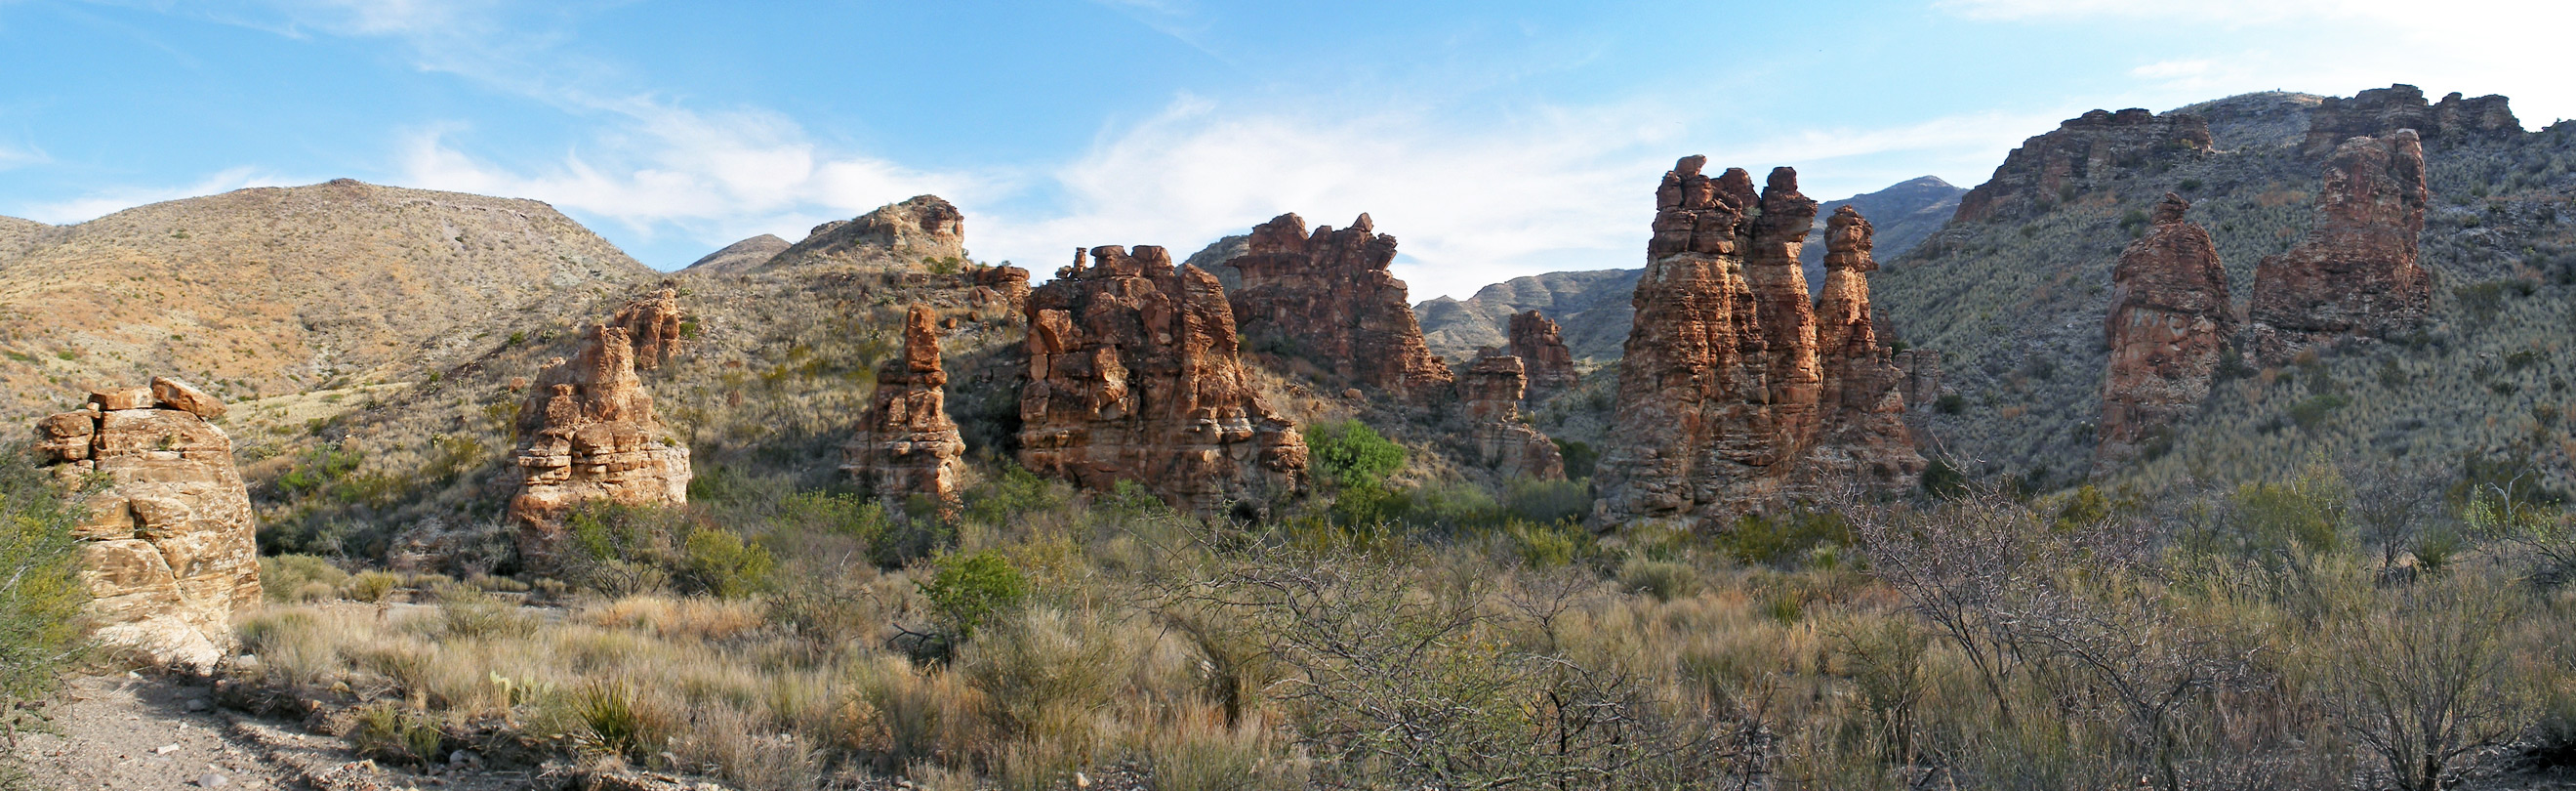 Panorama of rocks near the lower end of the canyon